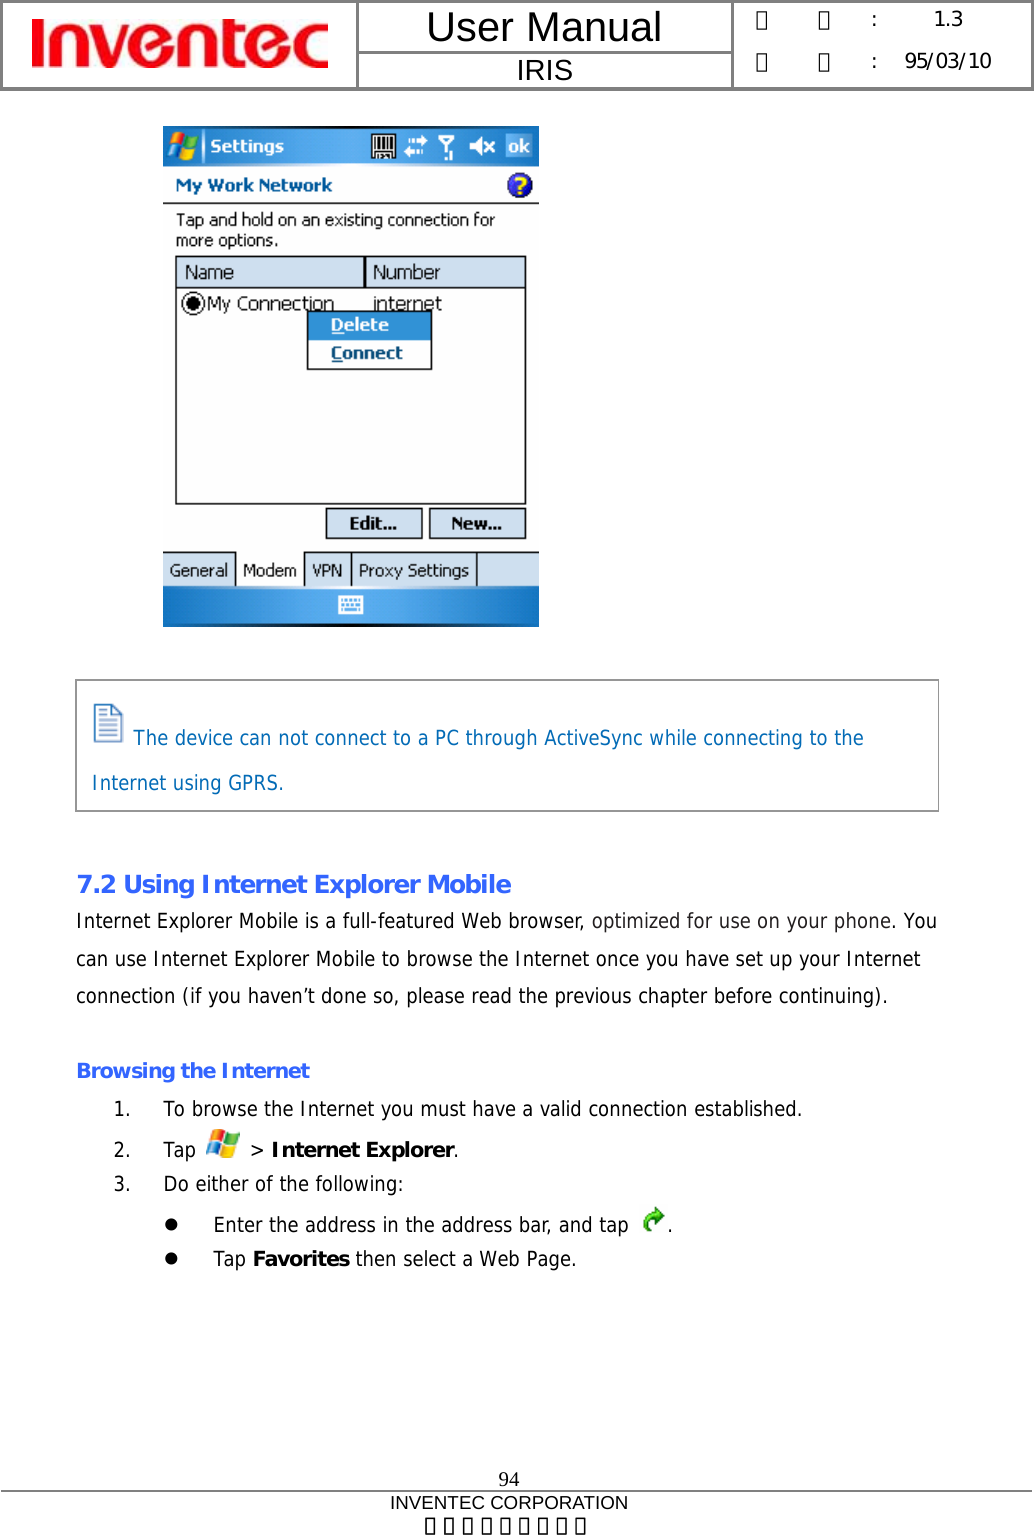 User Manual  IRIS 版    本 :  1.3 日    期 : 95/03/10  94 INVENTEC CORPORATION 英業達股份有限公司         7.2 Using Internet Explorer Mobile Internet Explorer Mobile is a full-featured Web browser, optimized for use on your phone. You can use Internet Explorer Mobile to browse the Internet once you have set up your Internet connection (if you haven’t done so, please read the previous chapter before continuing).  Browsing the Internet 1. To browse the Internet you must have a valid connection established. 2. Tap   &gt; Internet Explorer. 3. Do either of the following: z Enter the address in the address bar, and tap  . z Tap Favorites then select a Web Page.    The device can not connect to a PC through ActiveSync while connecting to the Internet using GPRS. 